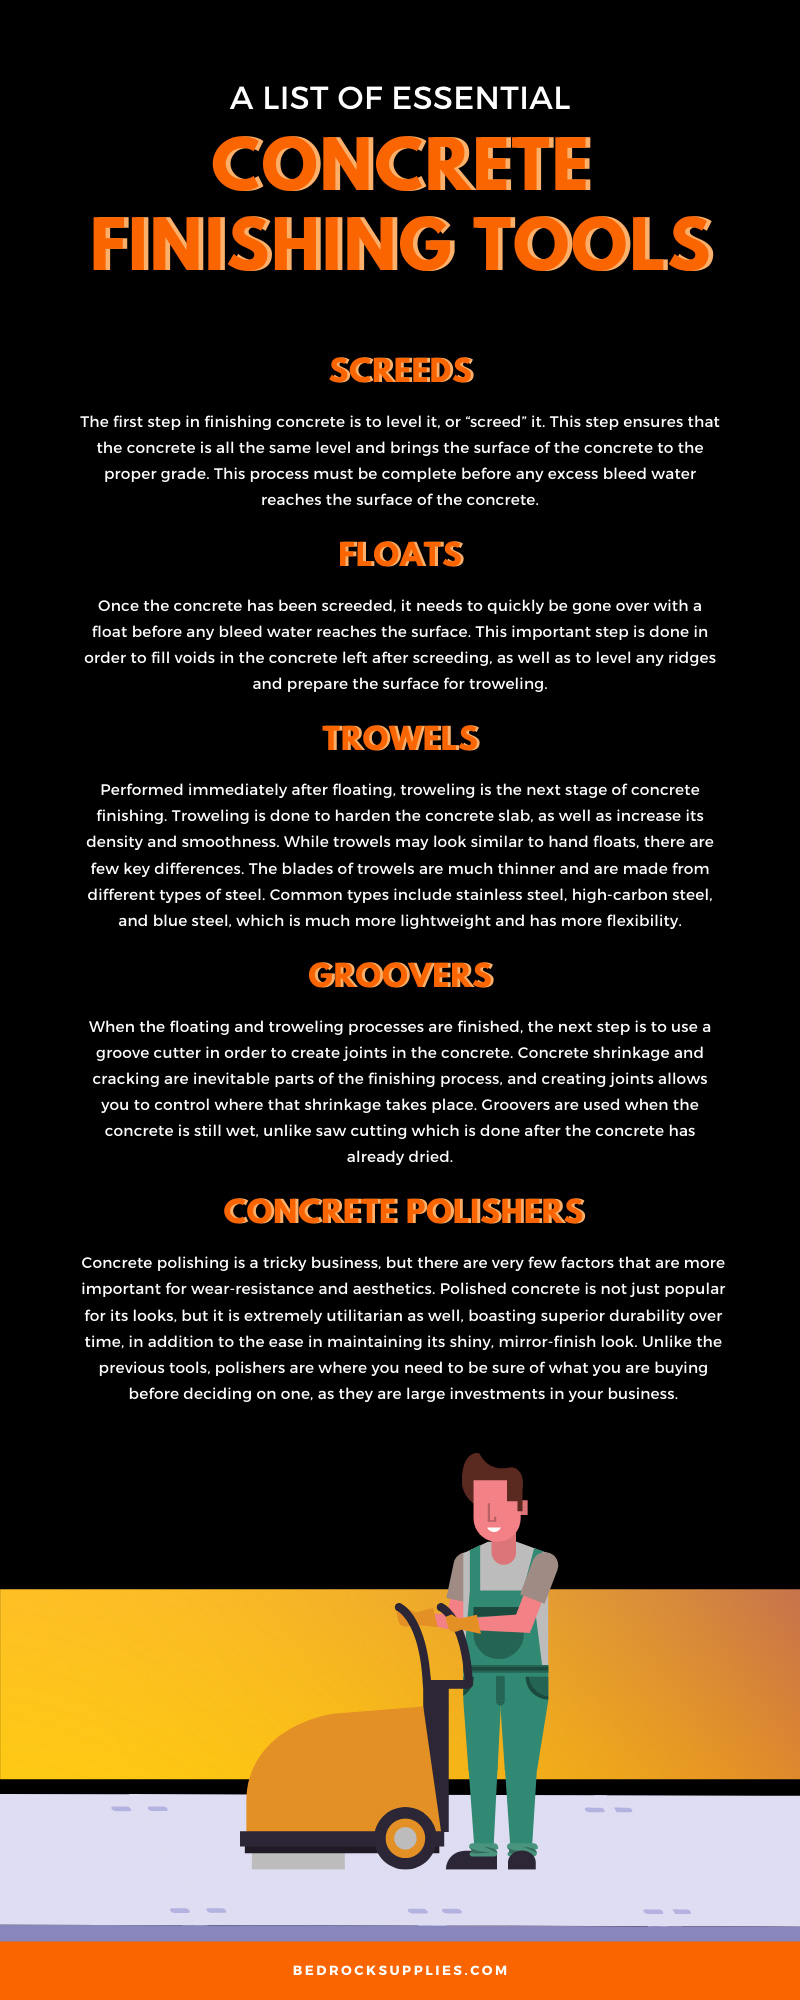 A List of Essential Concrete Finishing Tools Infographic